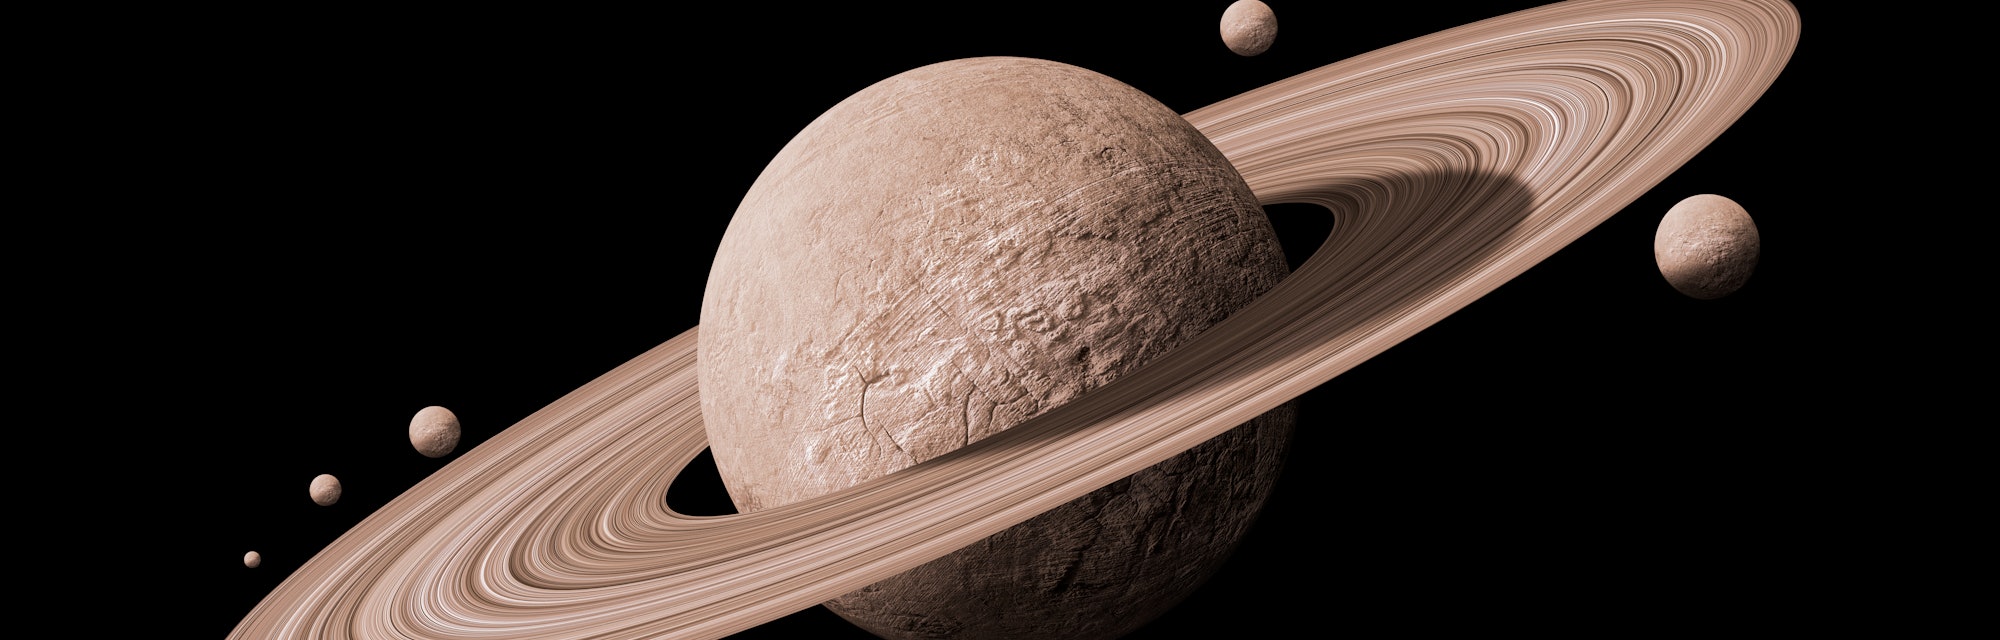 saturn planets in deep space with rings  and moons surrounded. isolated with clipping path